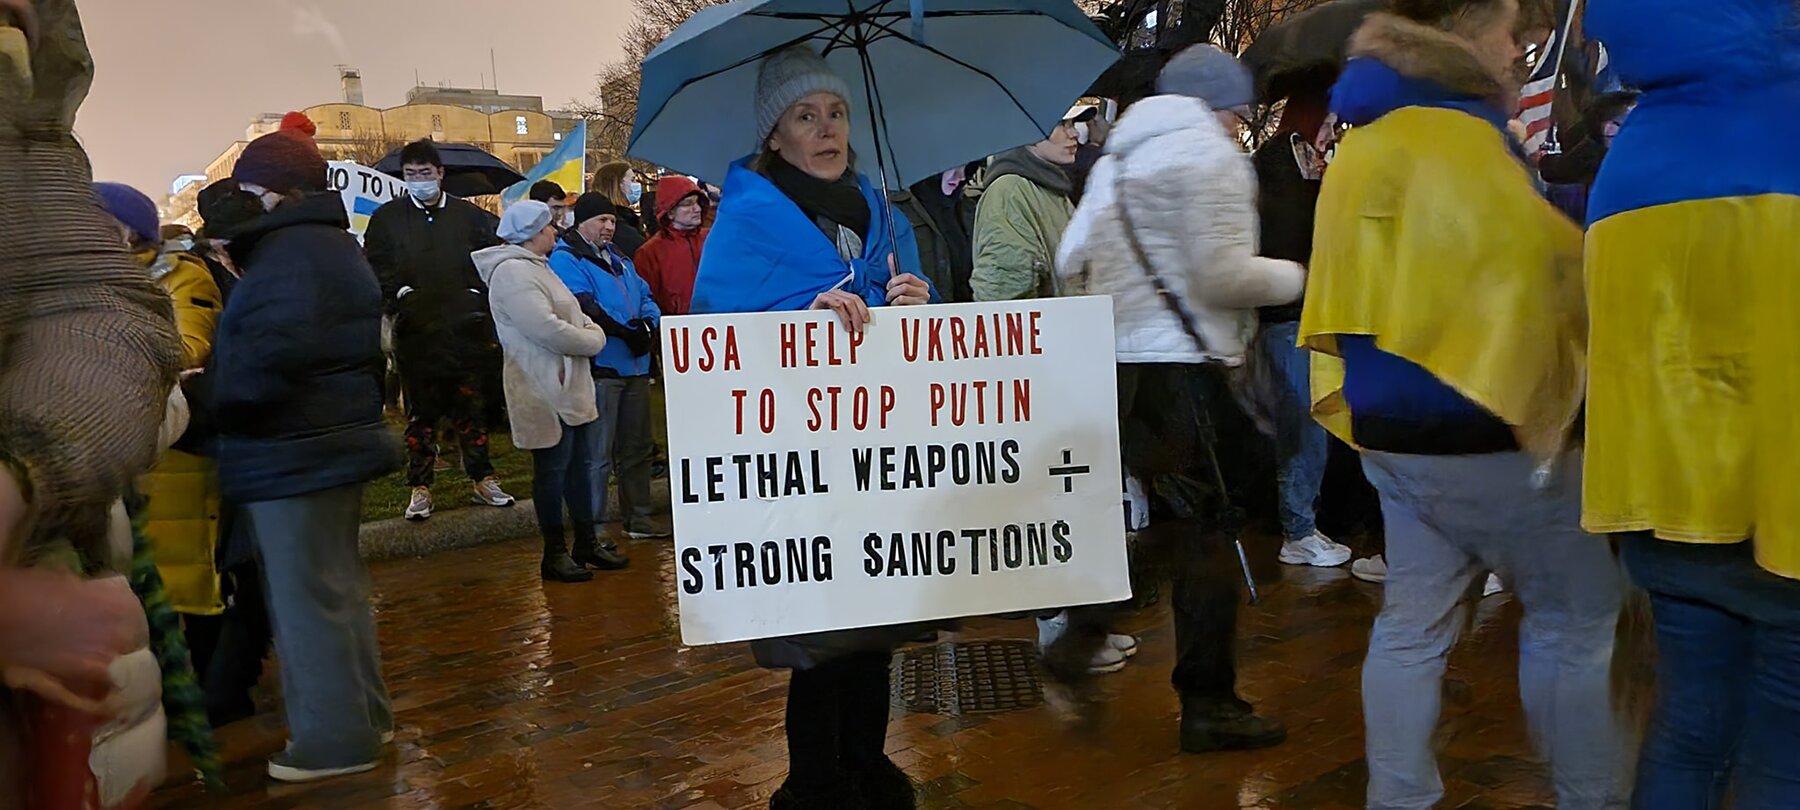 Ukrainian-Americans-protest-at-the-White-House-in-Washington-D.C,-calling-for-actions-against-...jpg